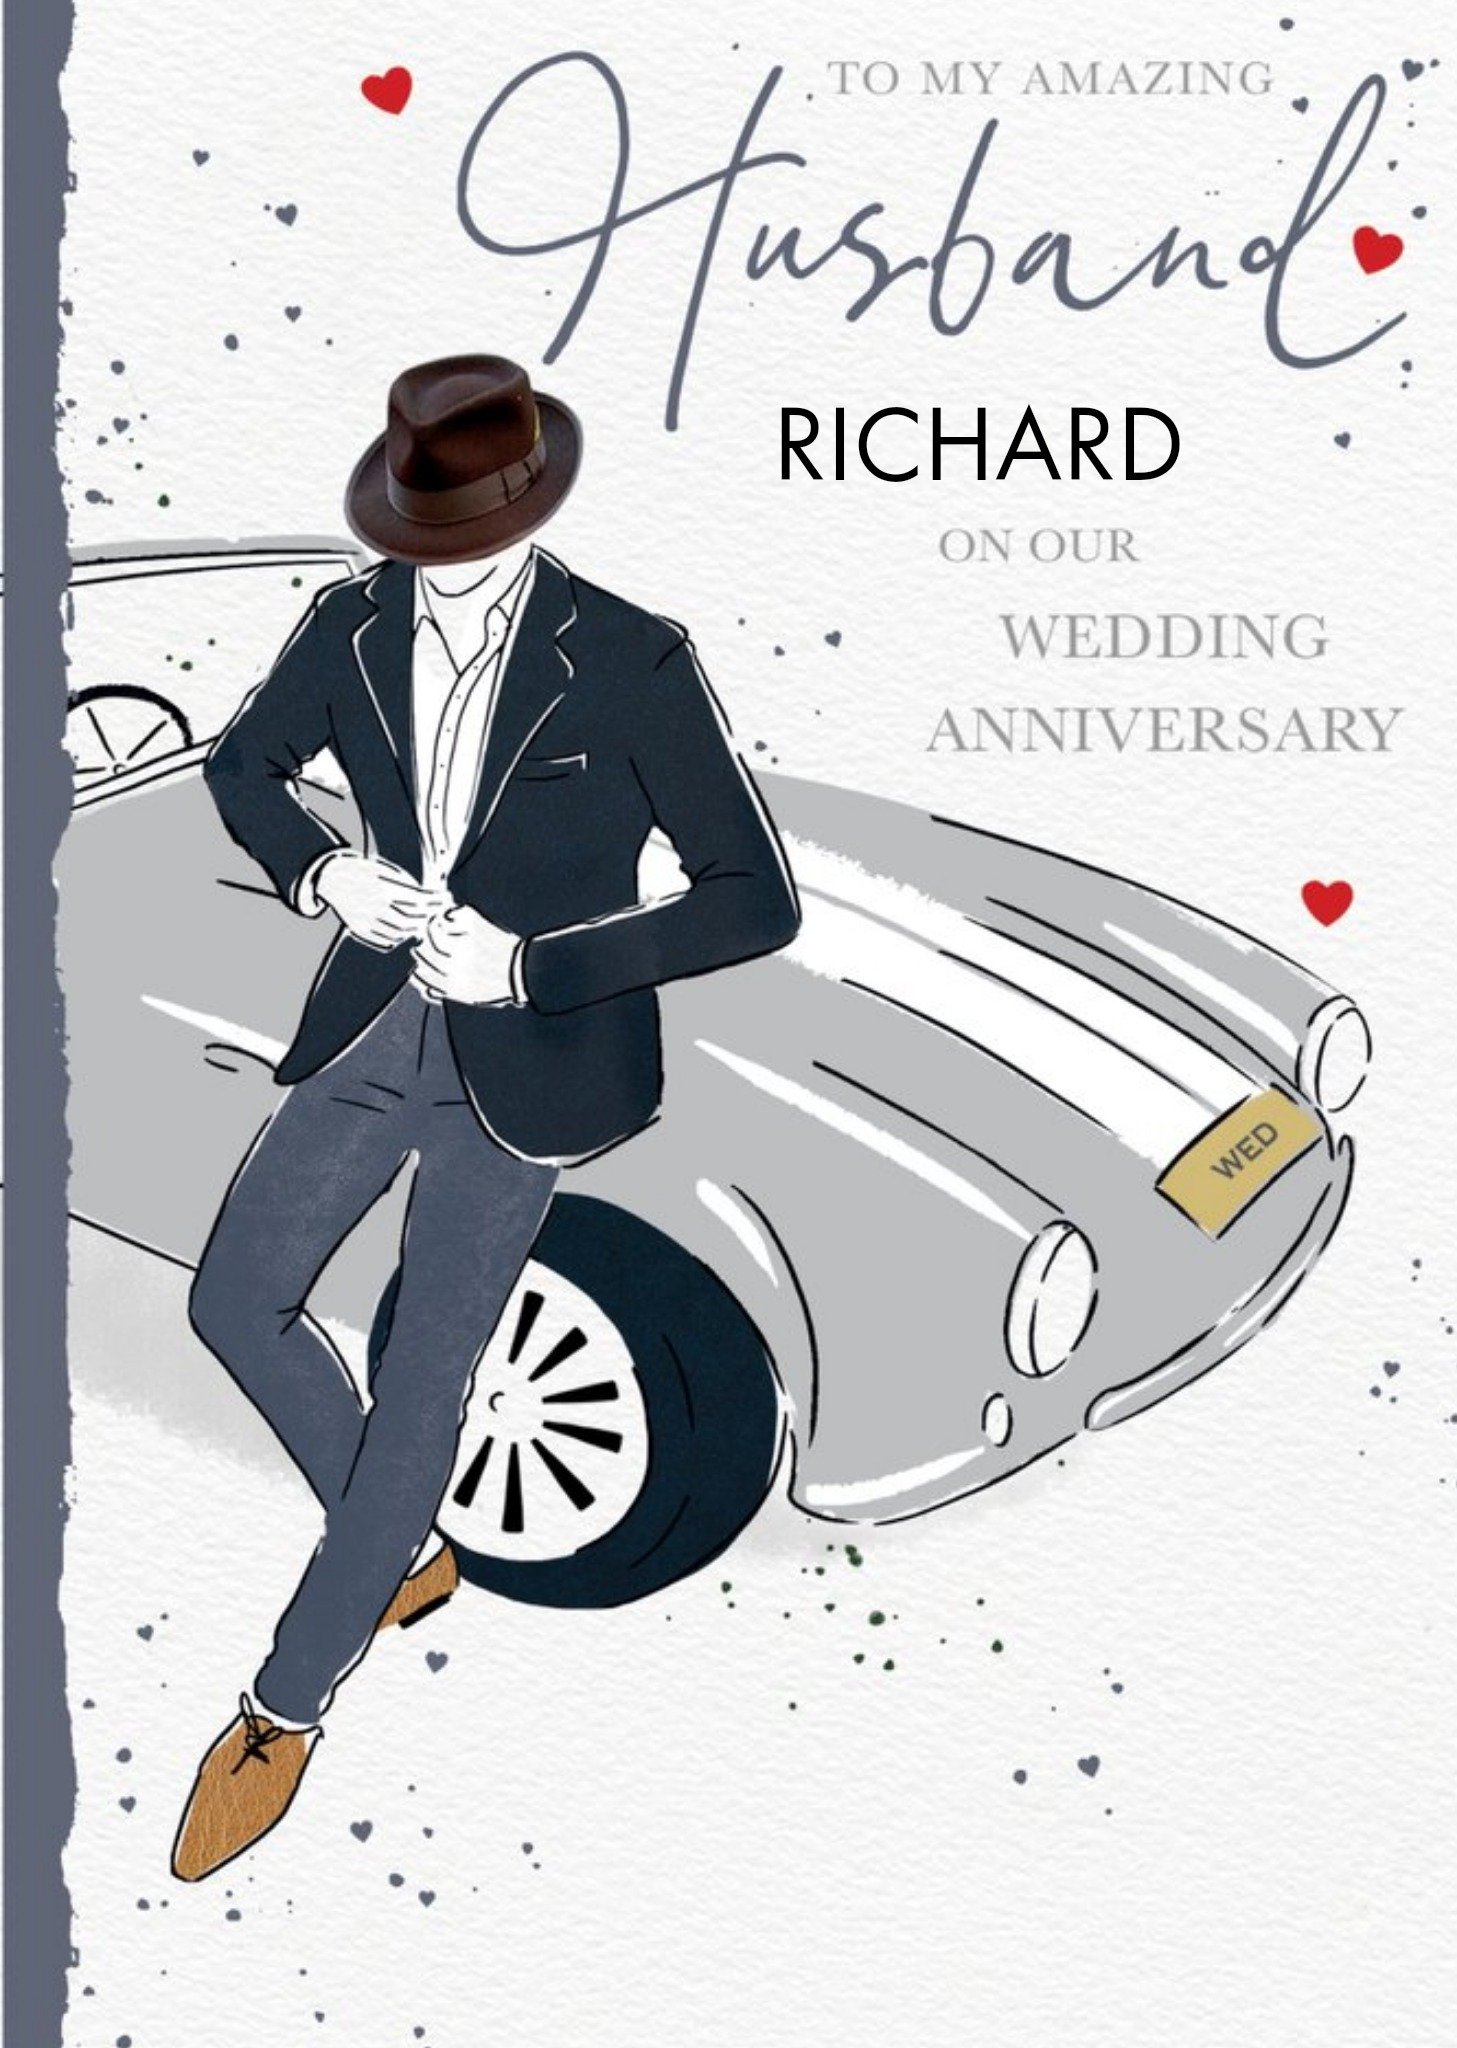 Moonpig Illustration Of A Man And A Classic Car Wedding Anniversary Card, Large